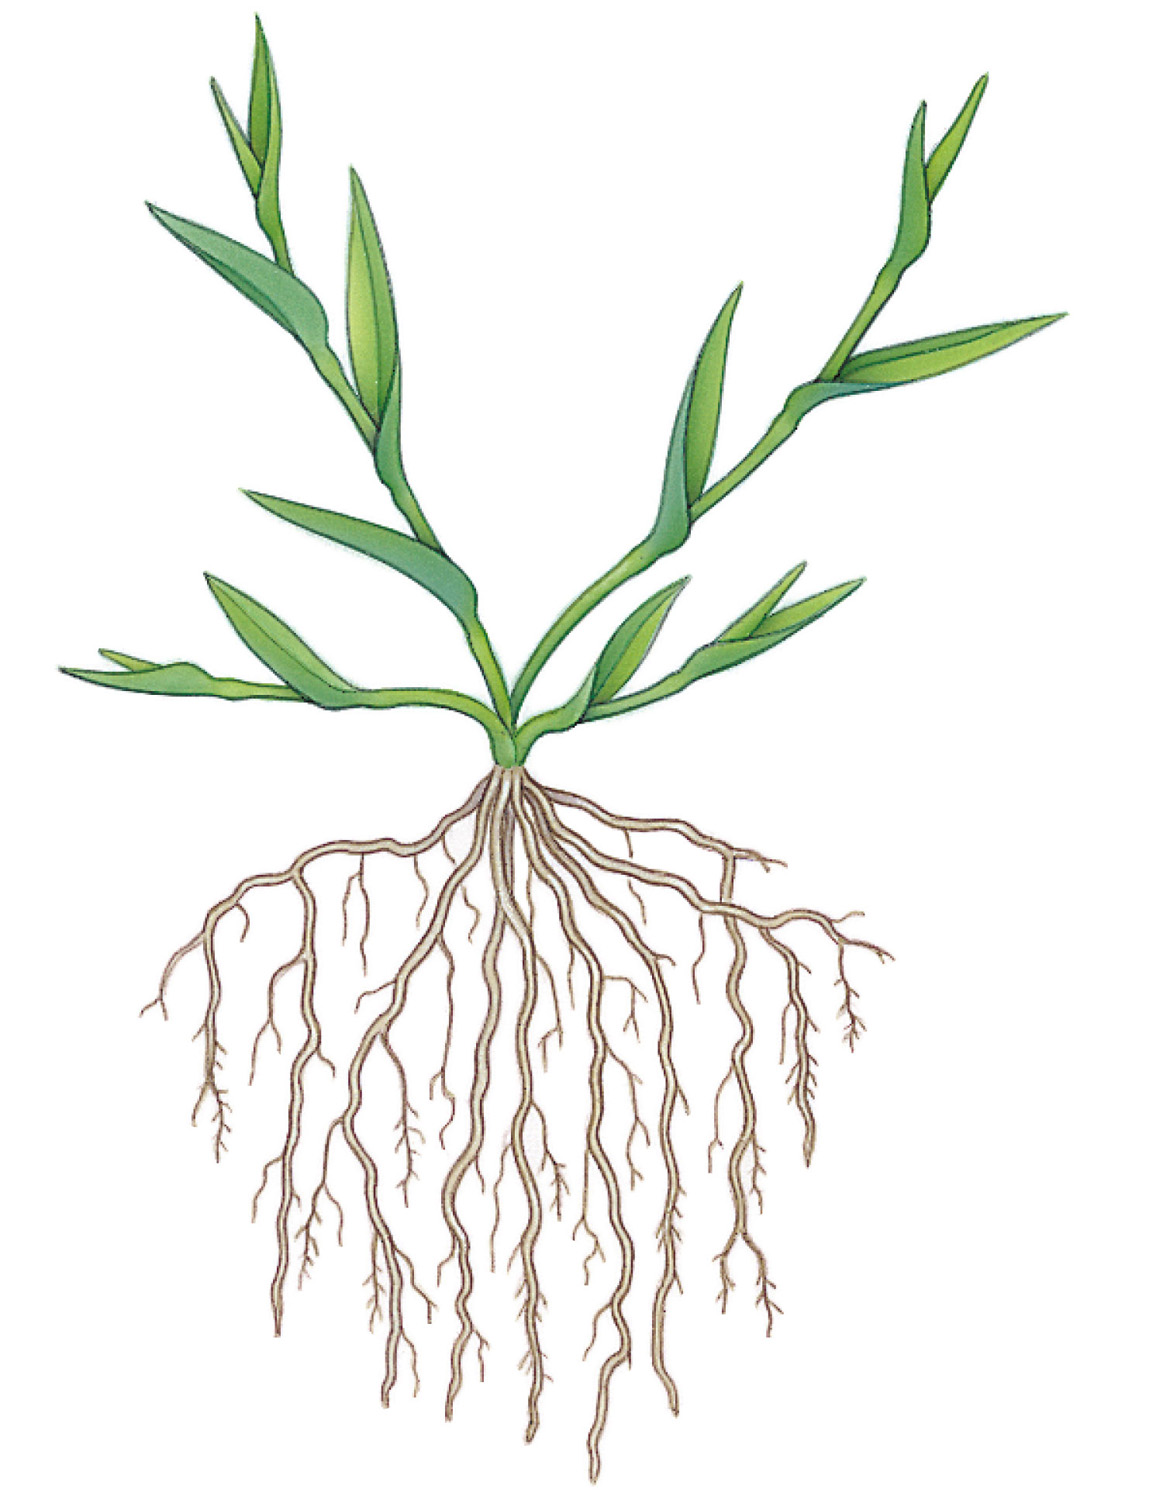 A fibrous root system has similar-sized adventitious roots that branch from the stem